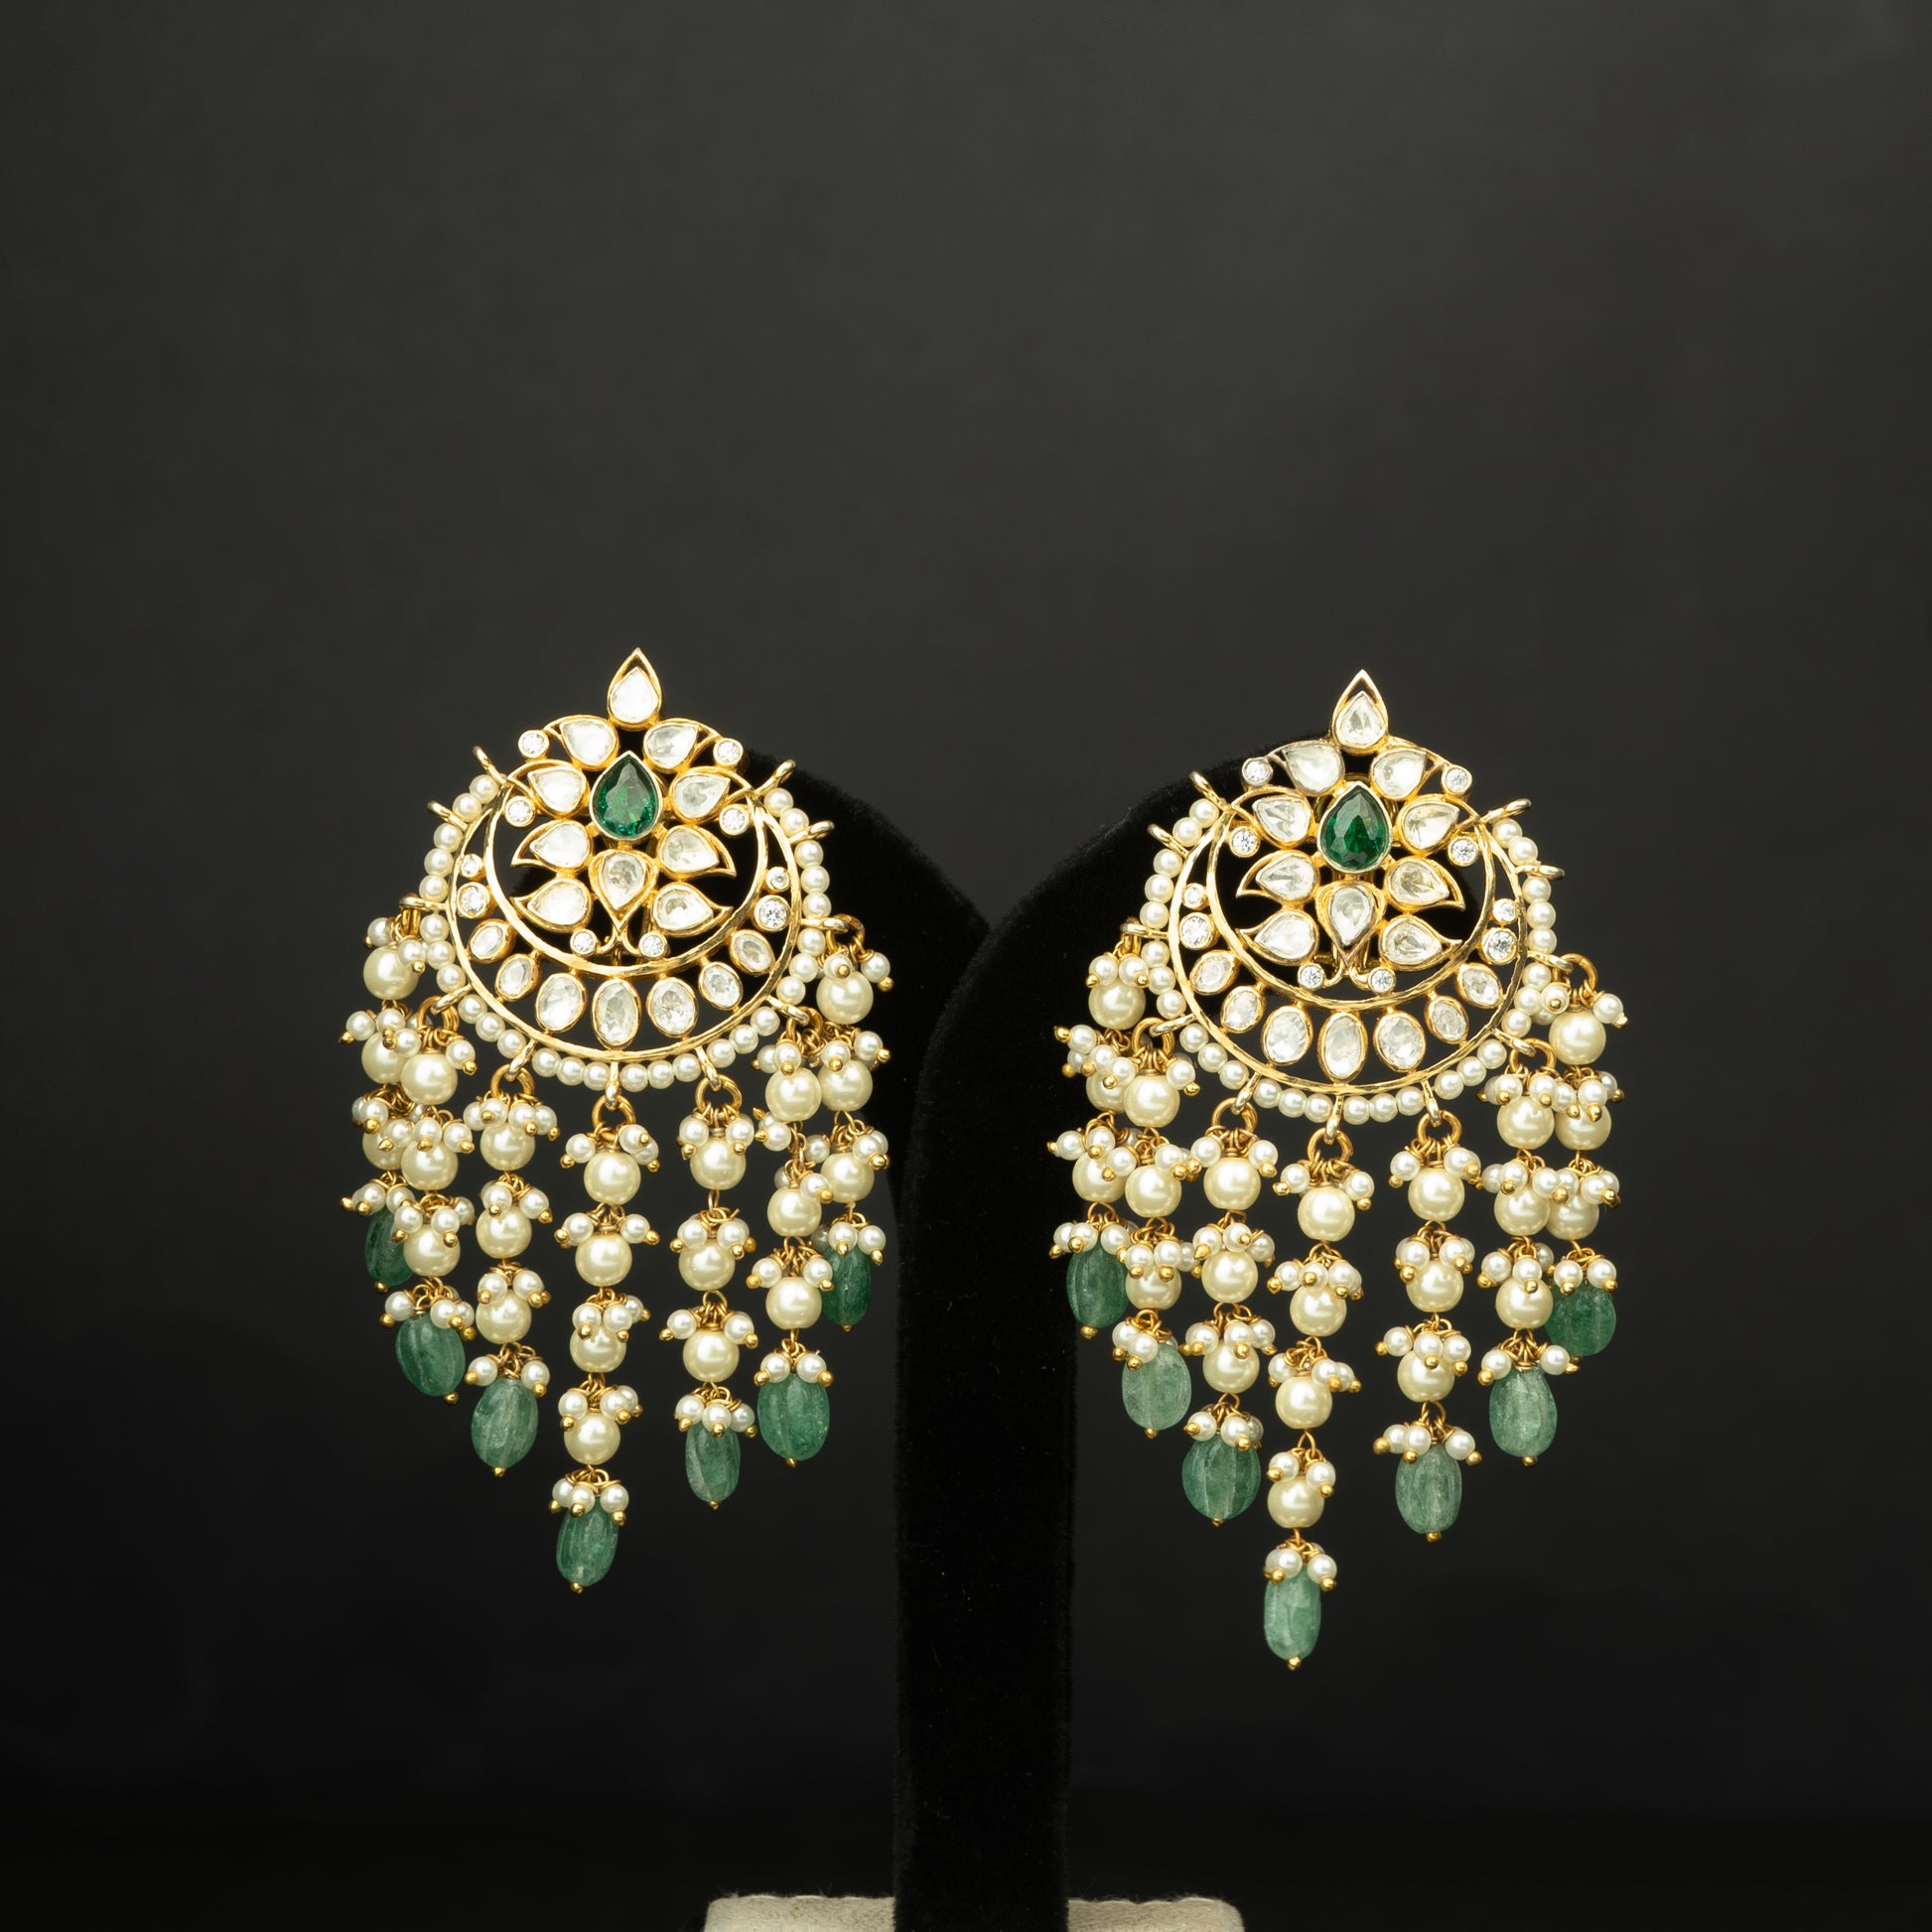 Siya Silver Earrings, crafted with premium gold-plated 92.5 silver featuring timeless cubic zirconia, moissanite stones, beads, and tourmaline